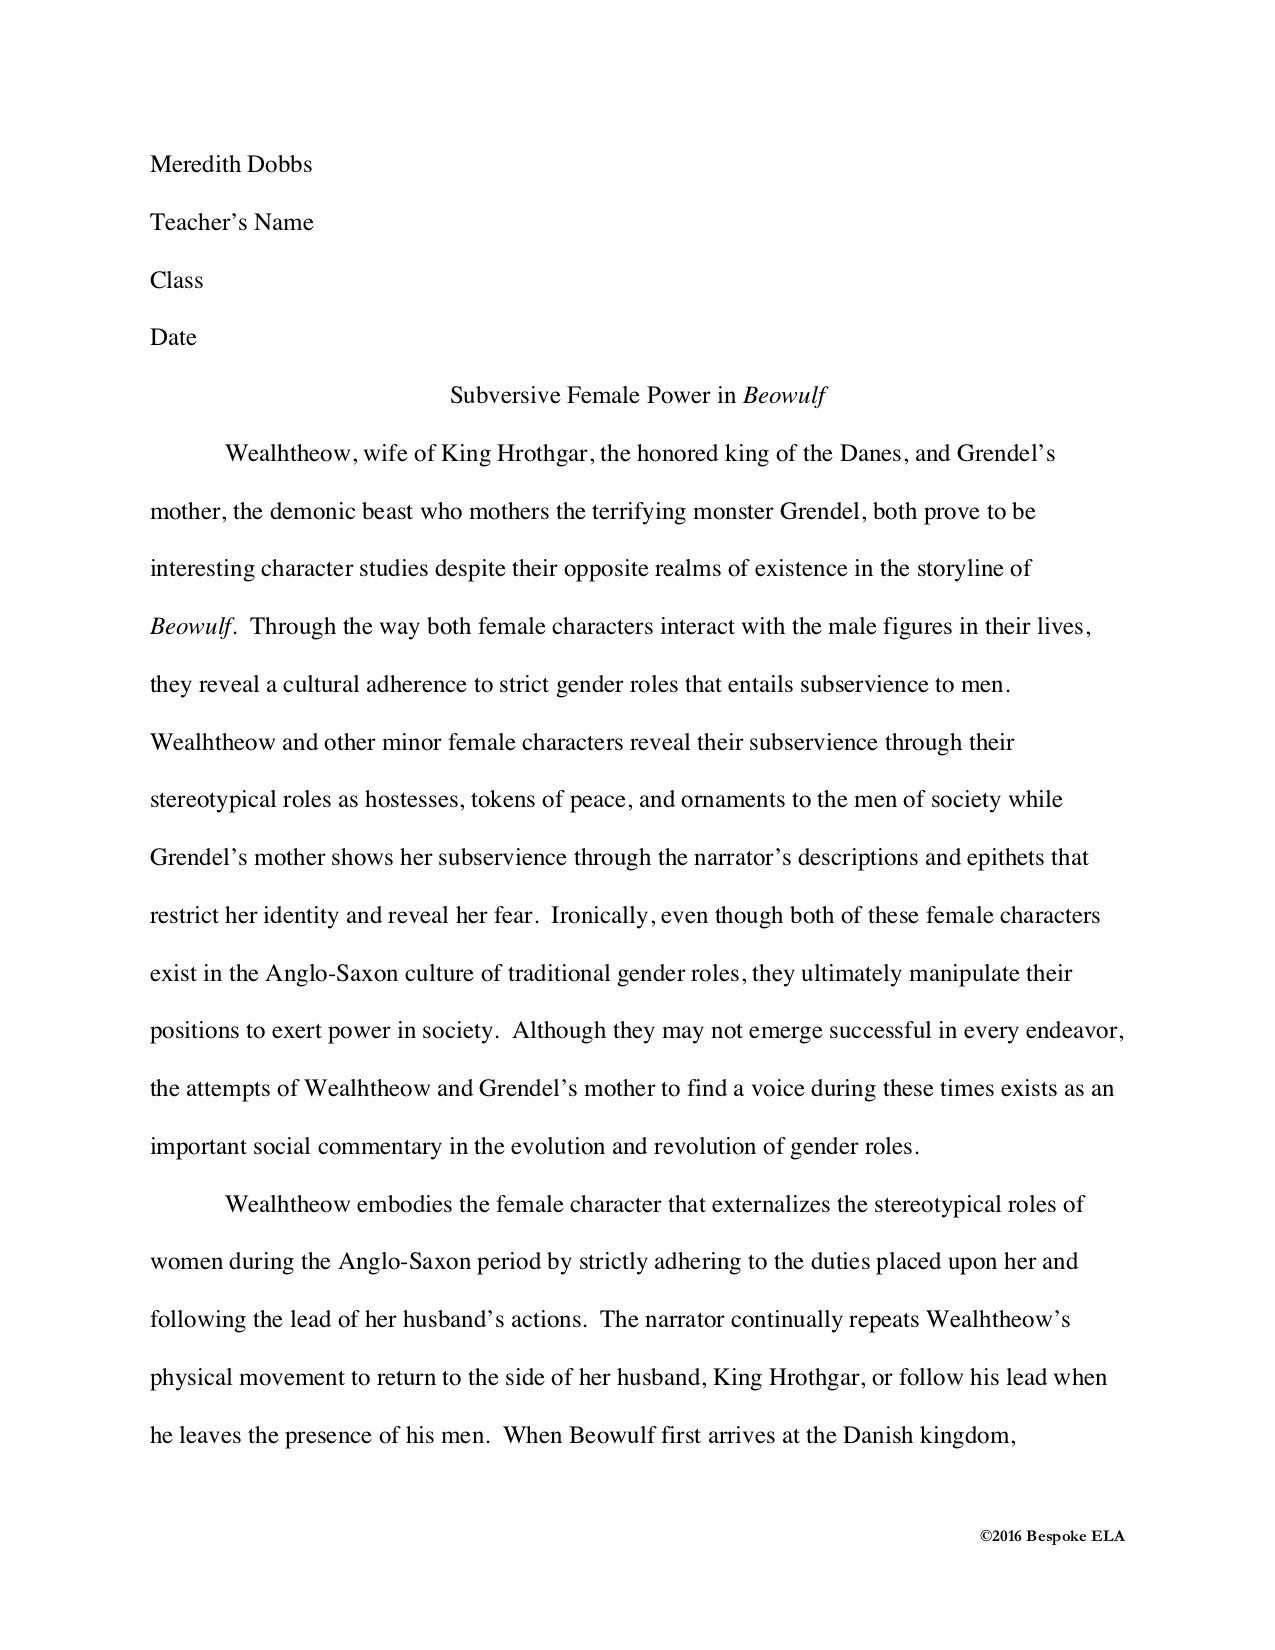 how to start a text analysis essay